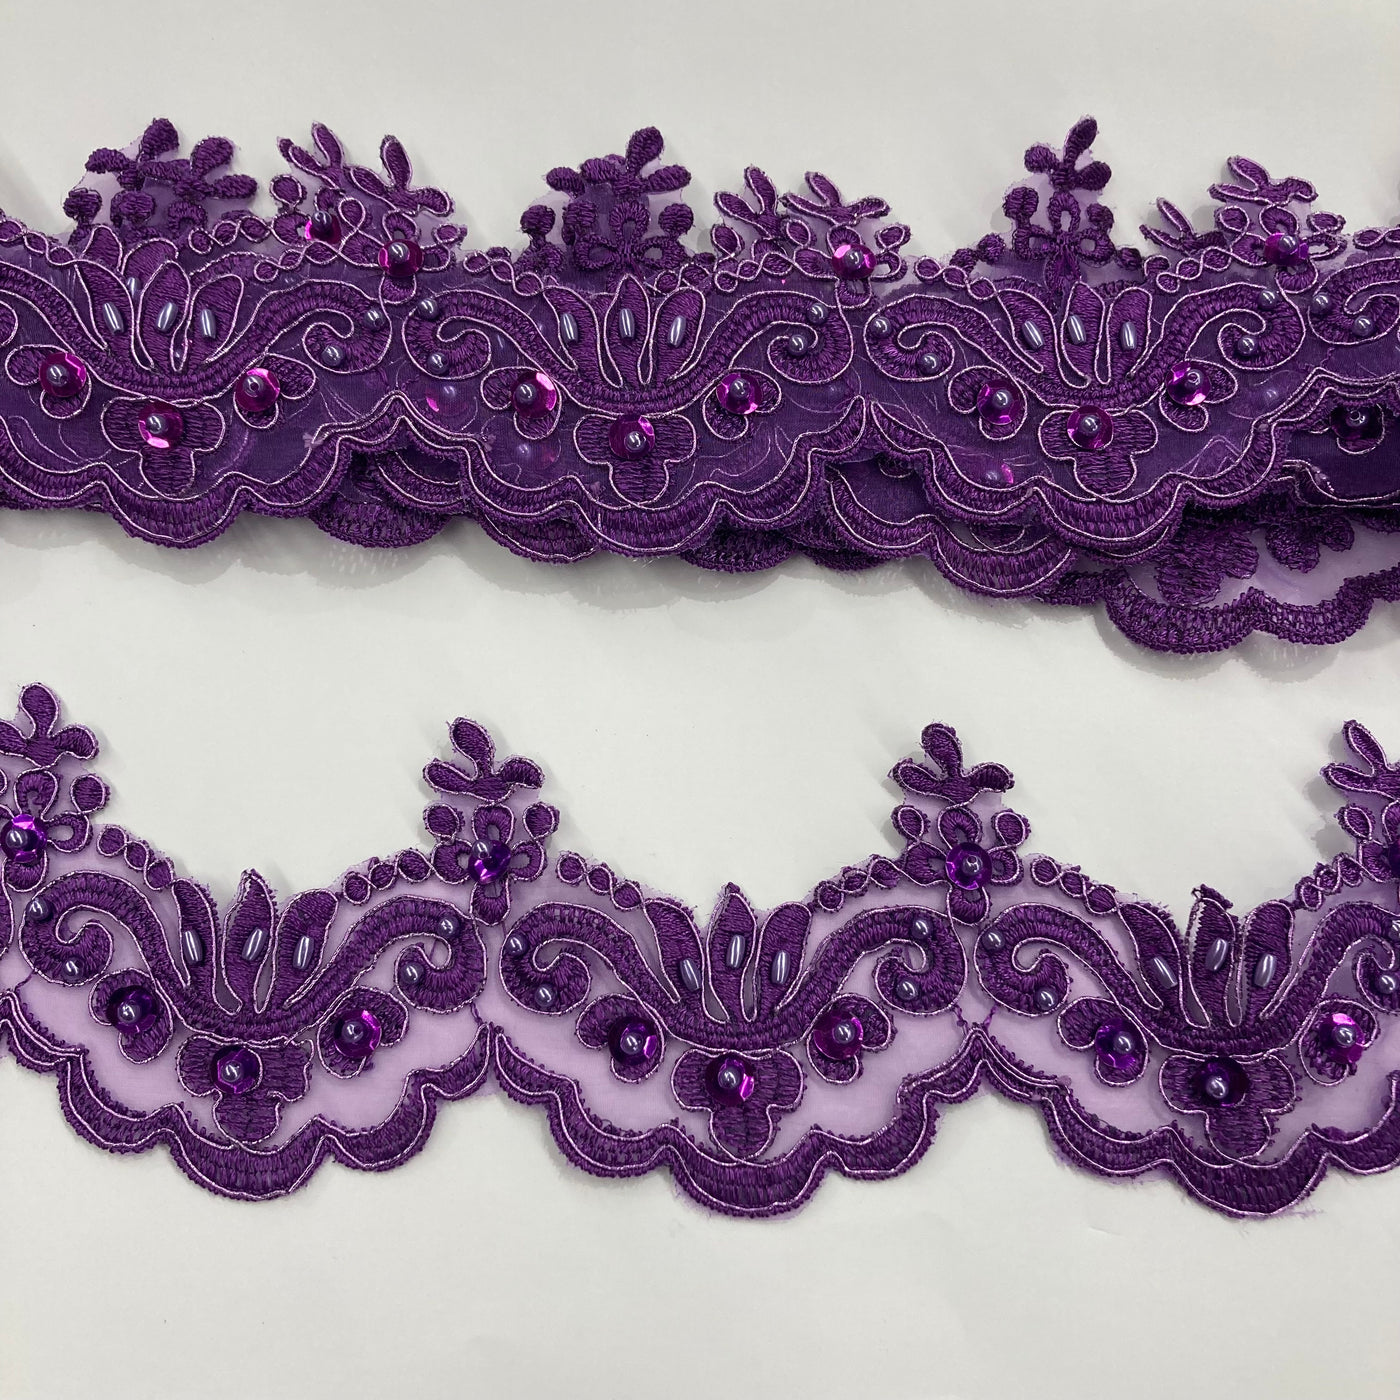 Corded, Beaded & Embroidered Trimming. Lace Usa